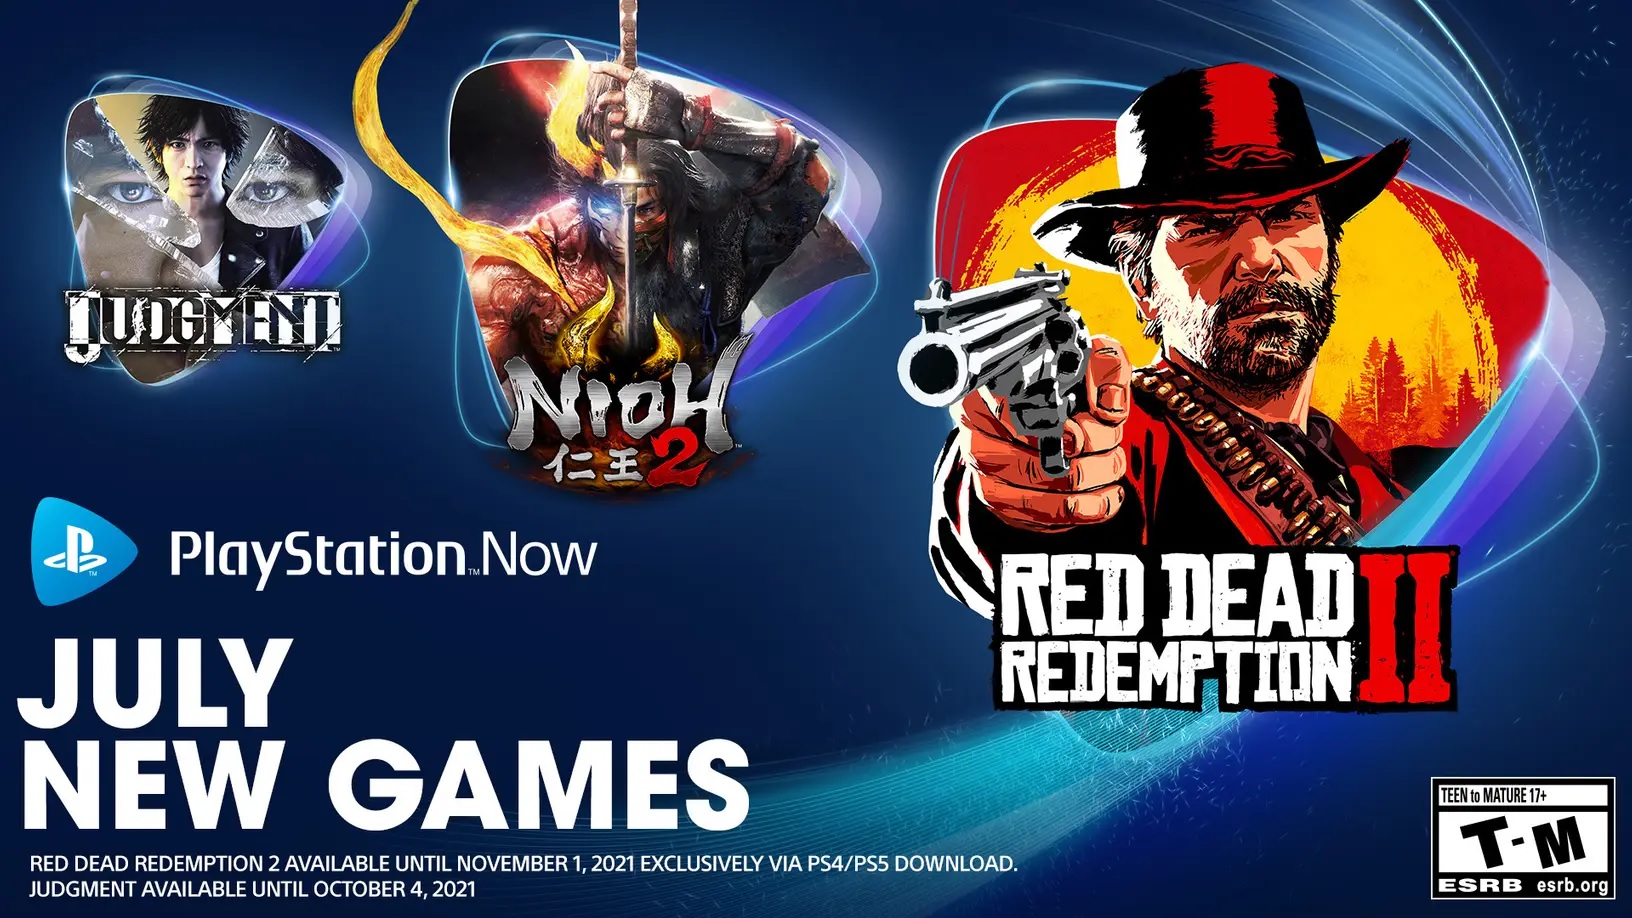 PlayStation Now adds Red Dead Redemption 2 and Judgement for July 2021 – Gameranx